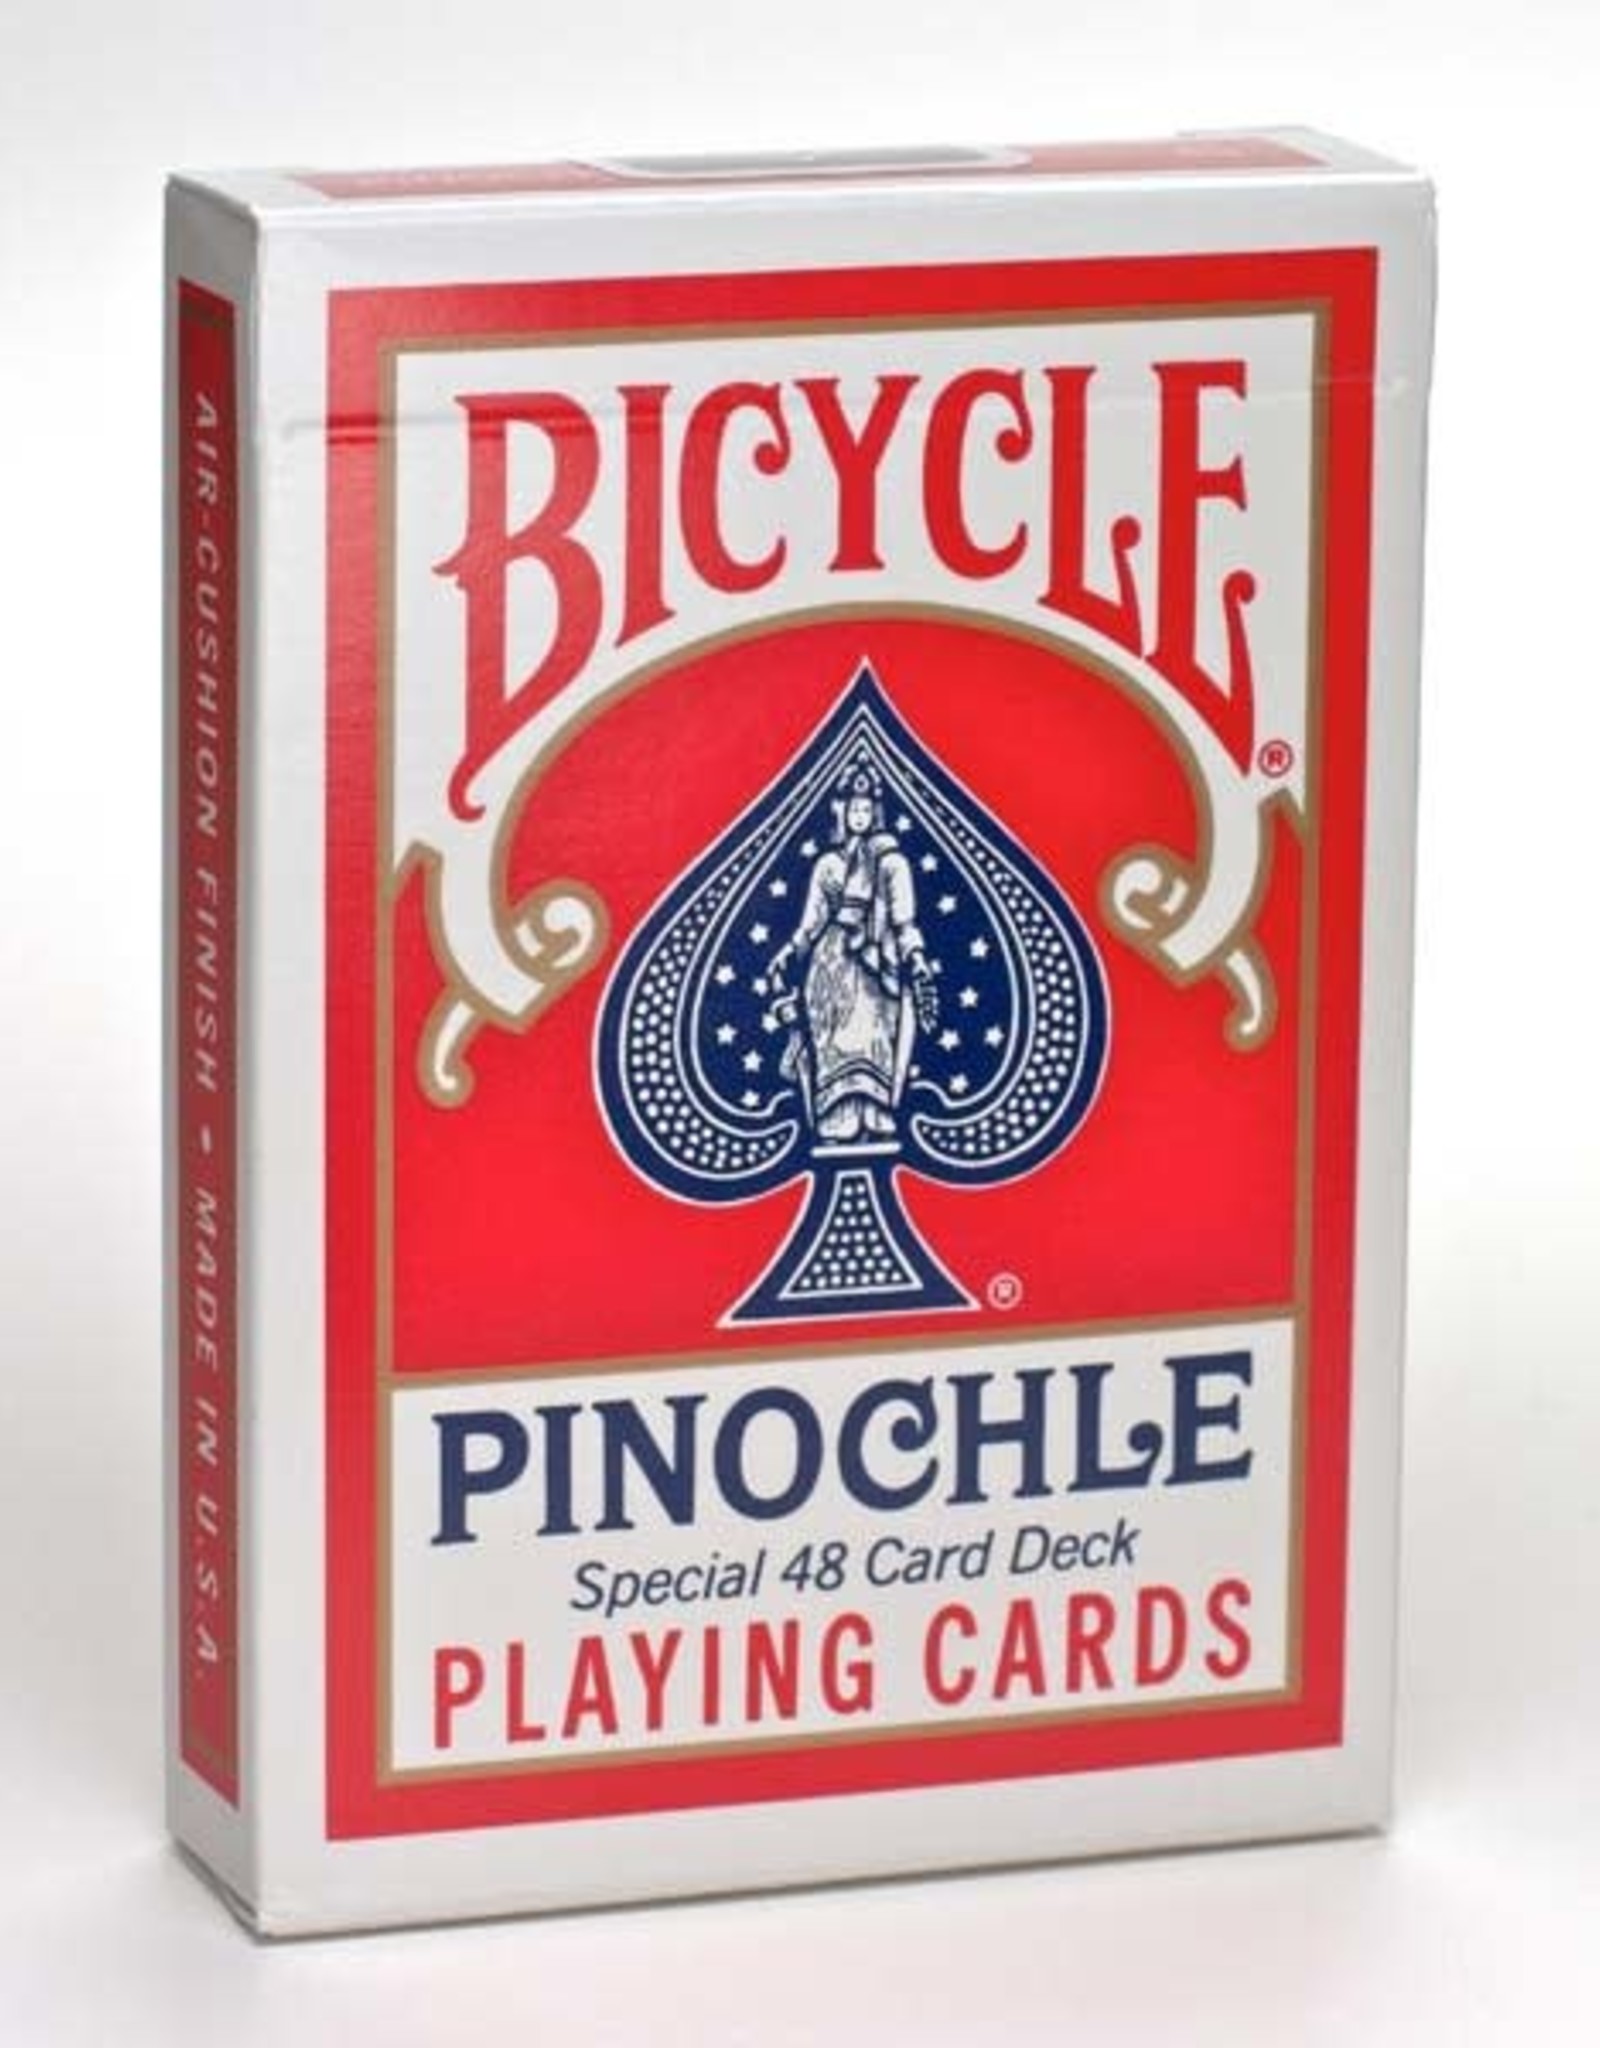 Bicycle Pinochle Deck